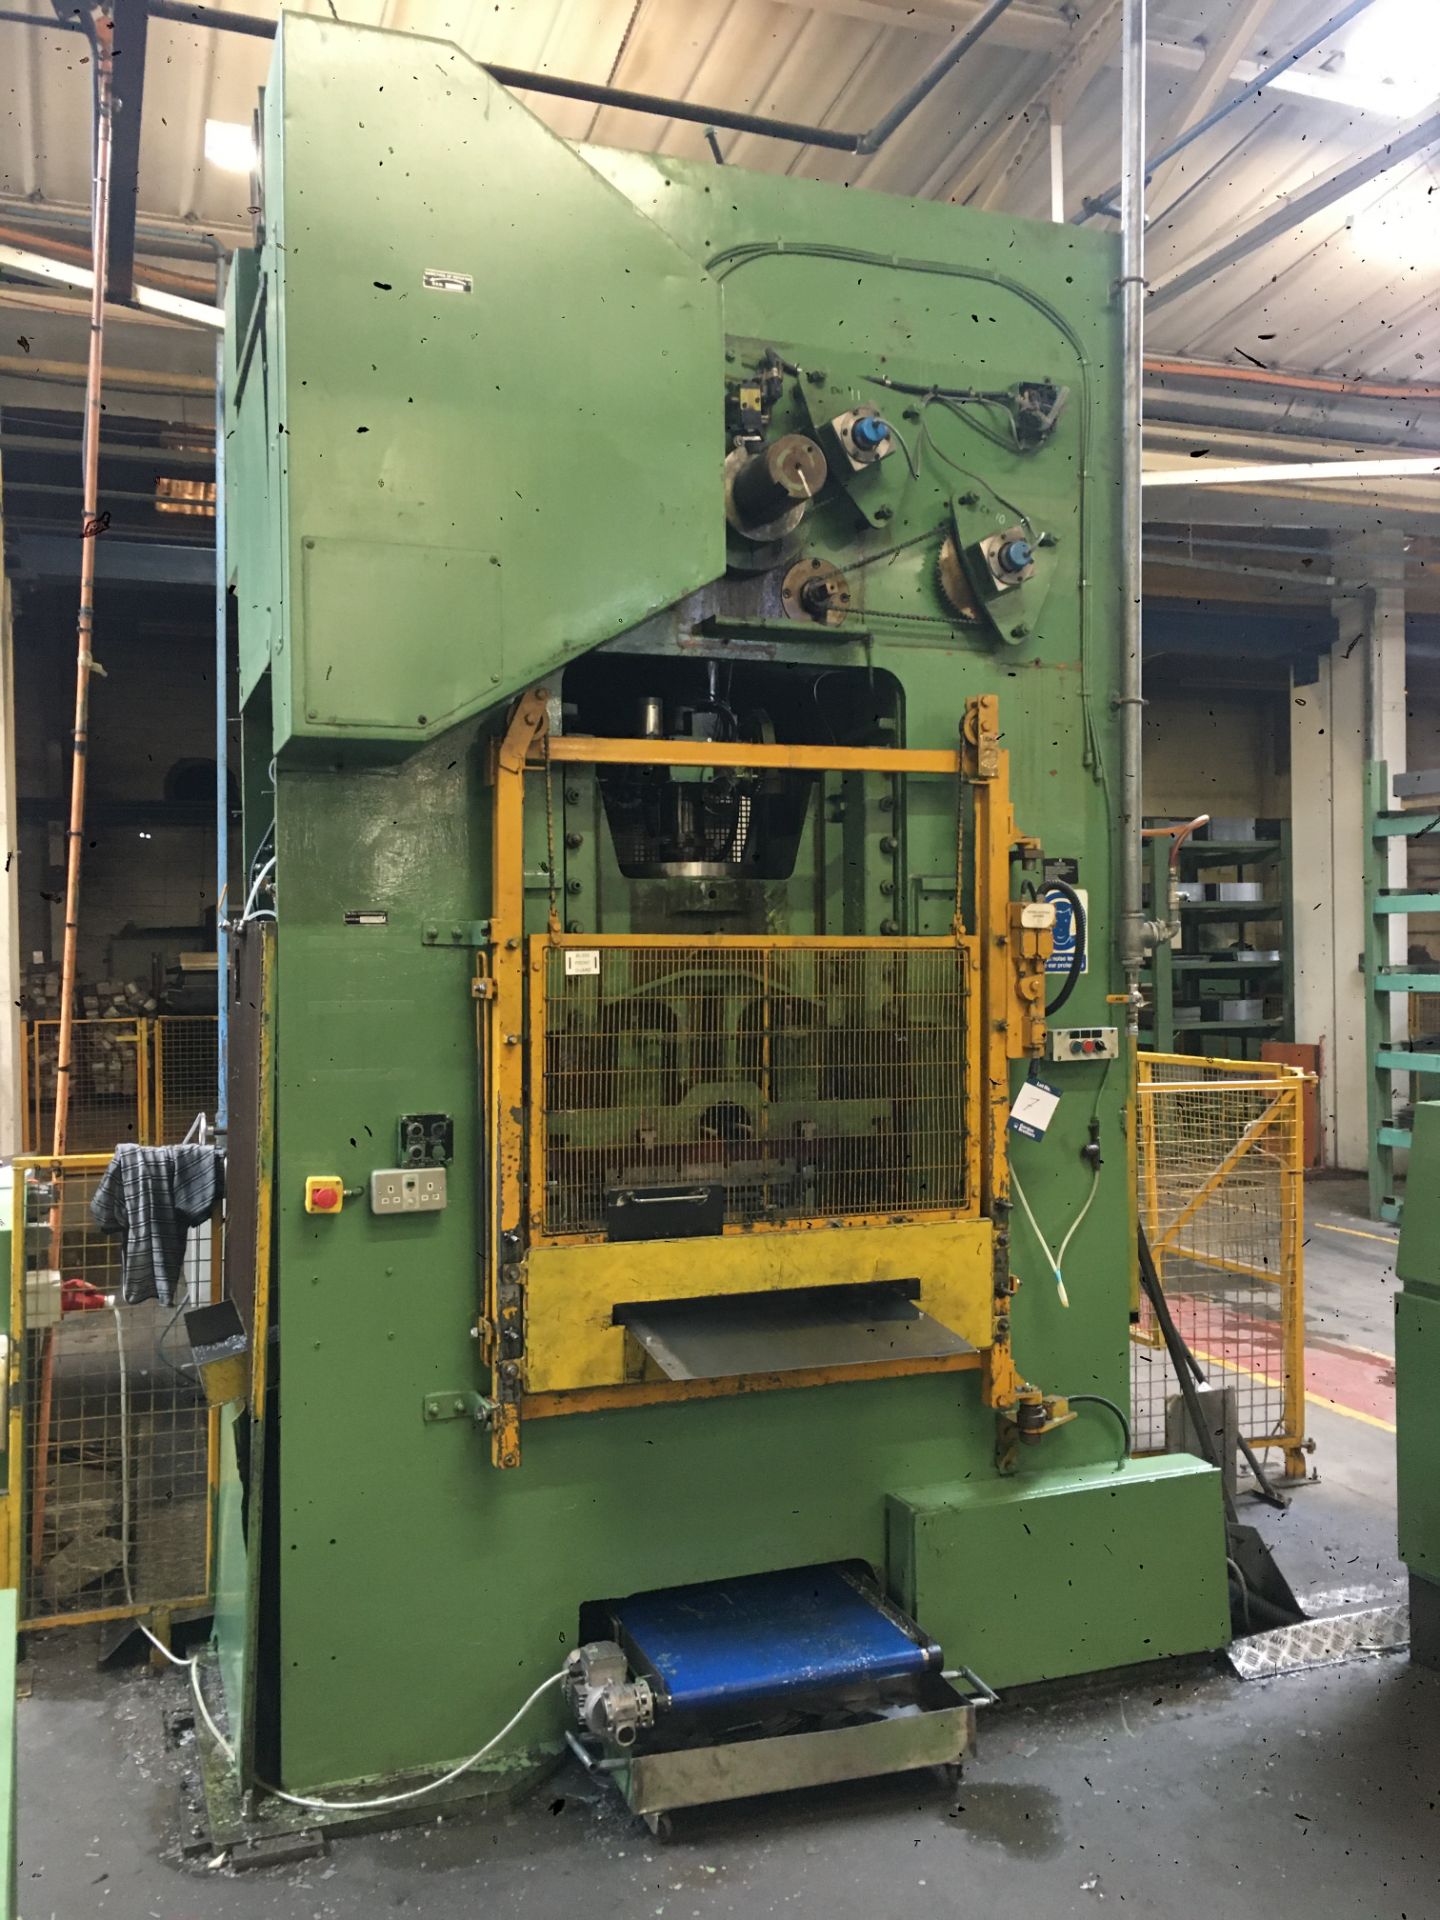 Rhodes, single ram hydraulic power press, capacity estimated 100T with off-station controls; TFT